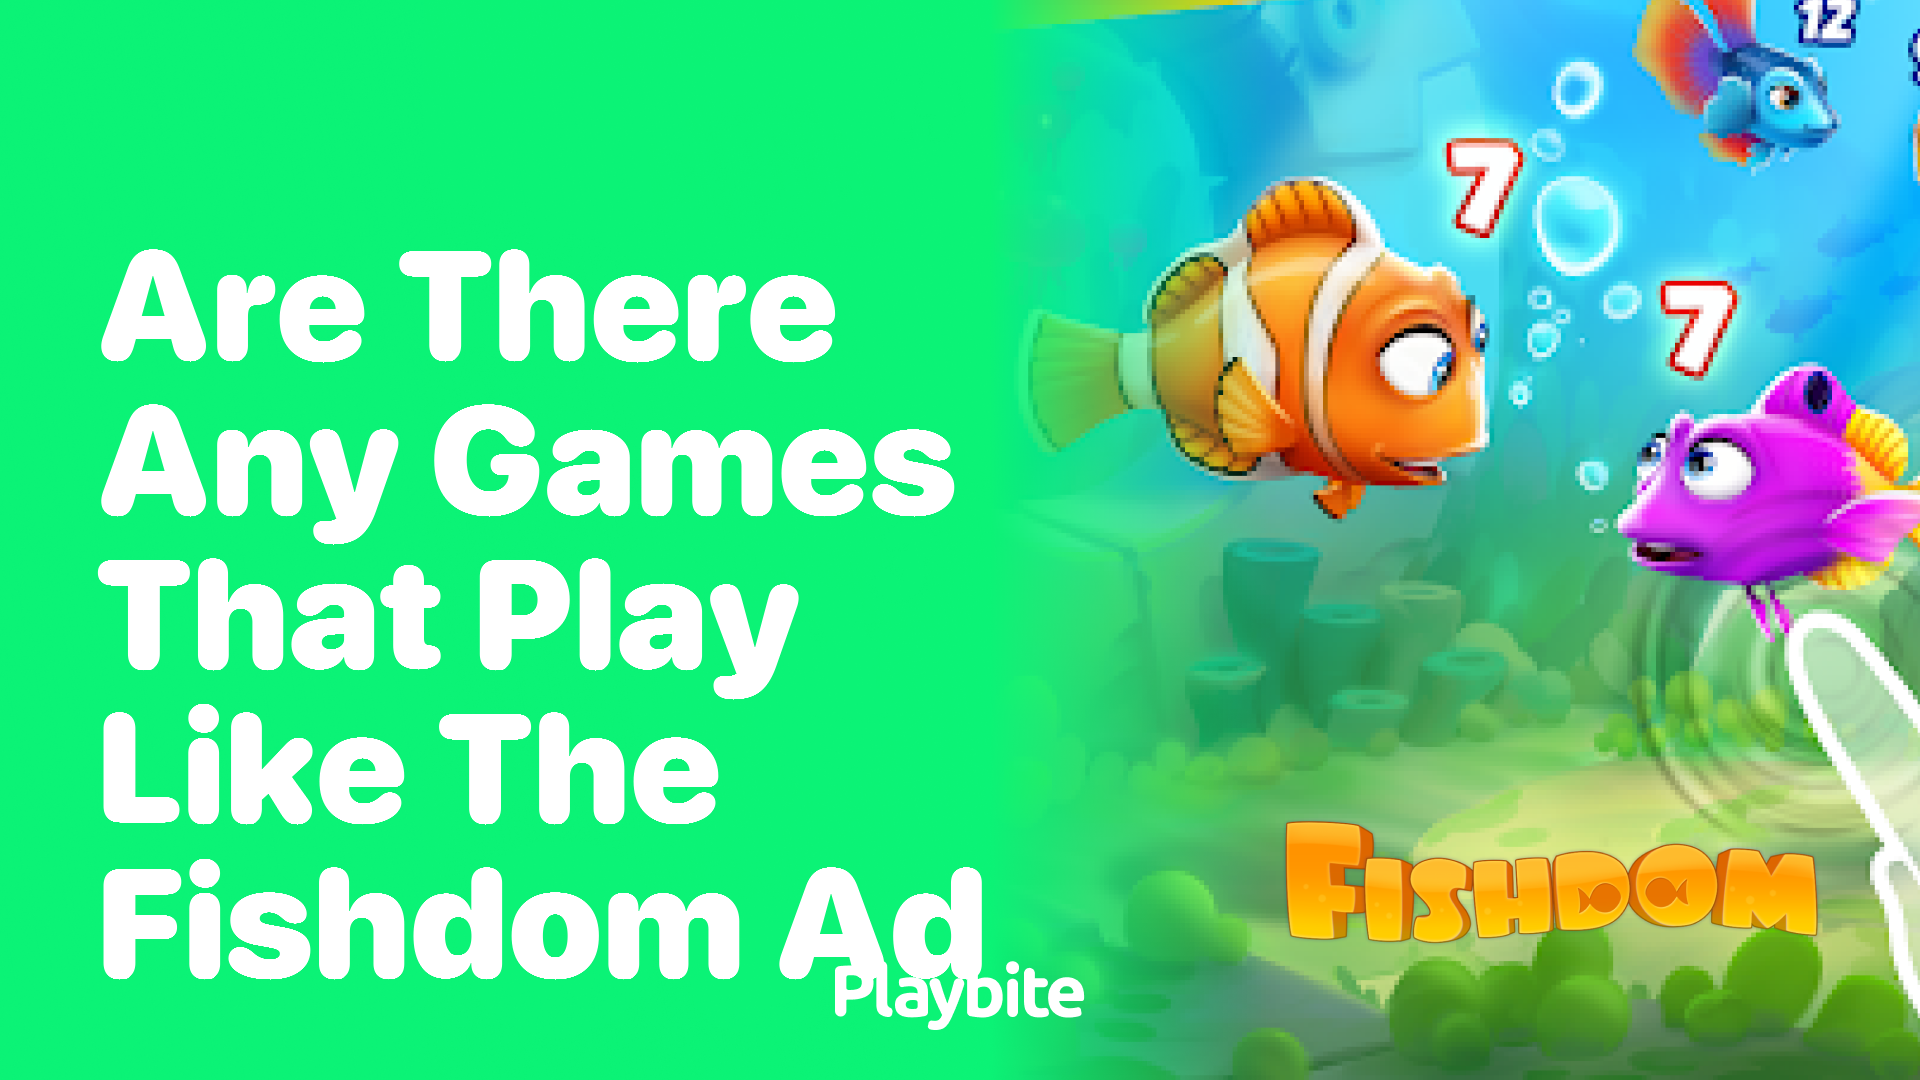 Are There Any Games That Play Like the Fishdom Ad?